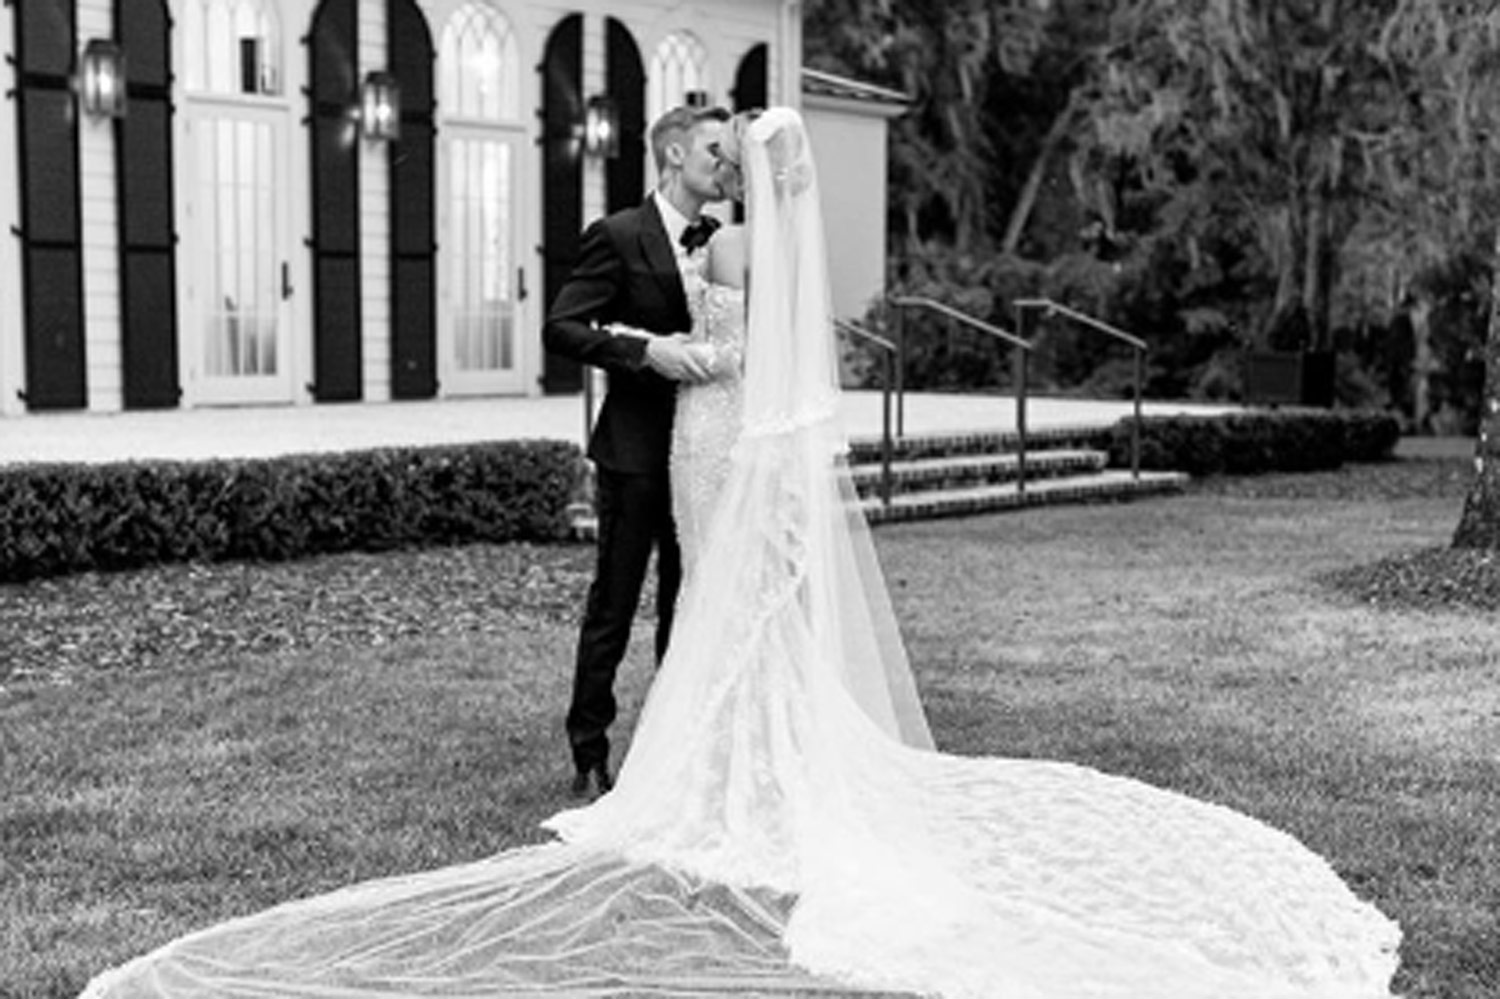 Everything To Know About Hailey Bieber’s Wedding Dress